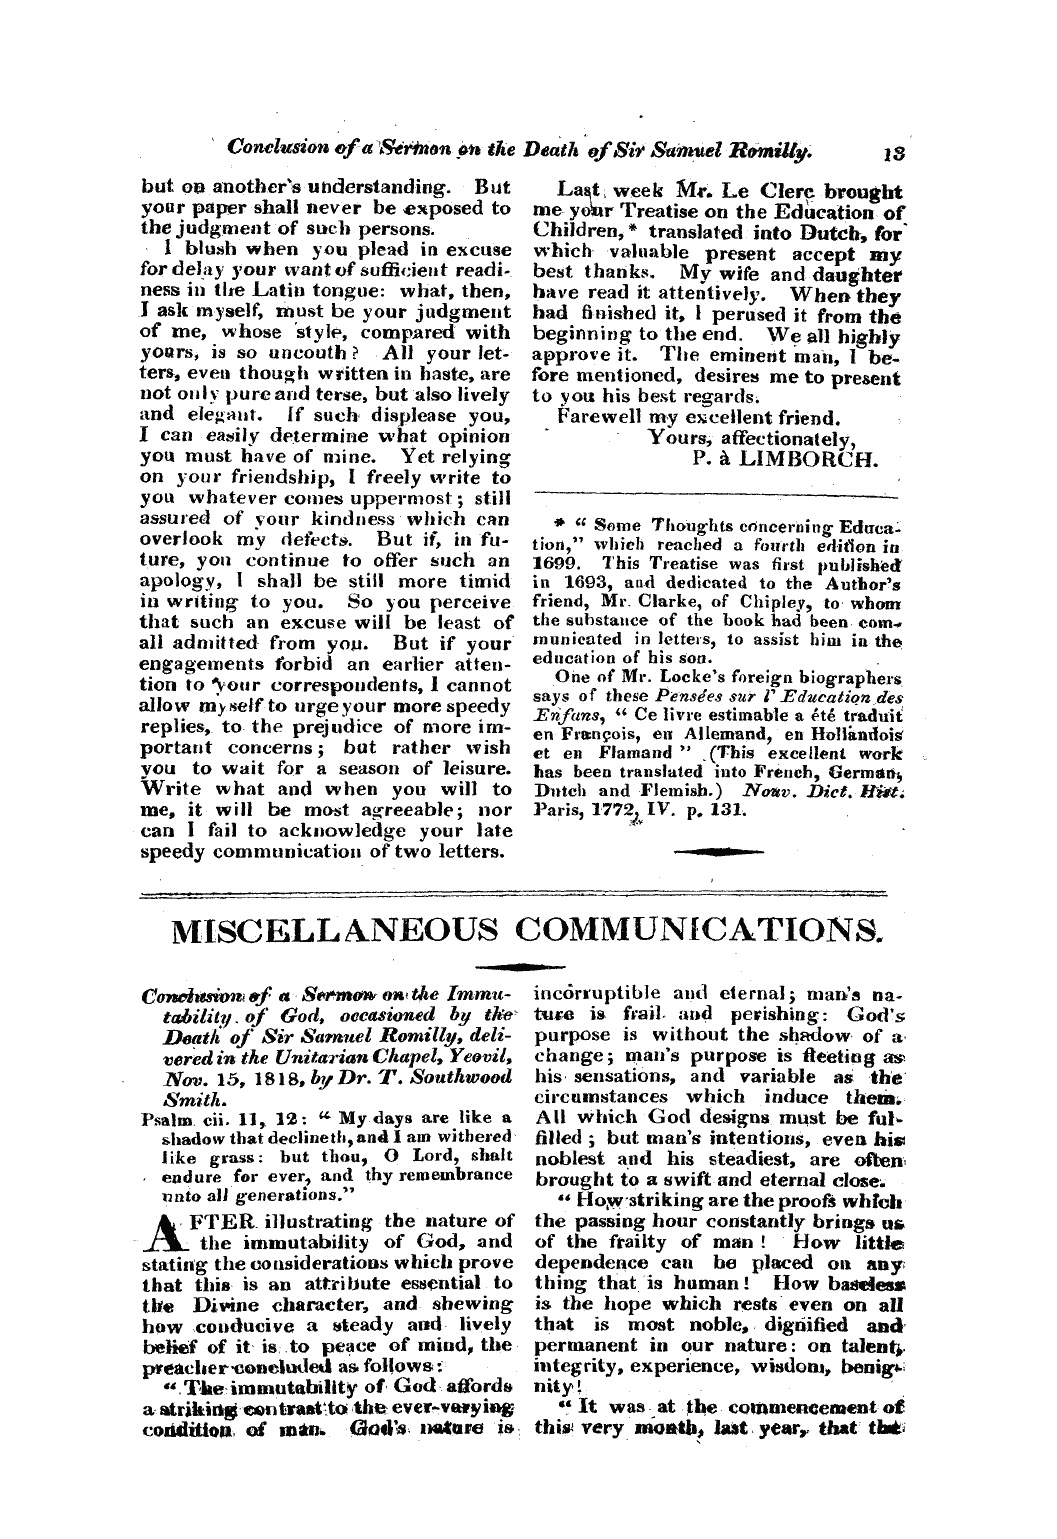 Monthly Repository (1806-1838) and Unitarian Chronicle (1832-1833): F Y, 1st edition - Miscellaneous Communications